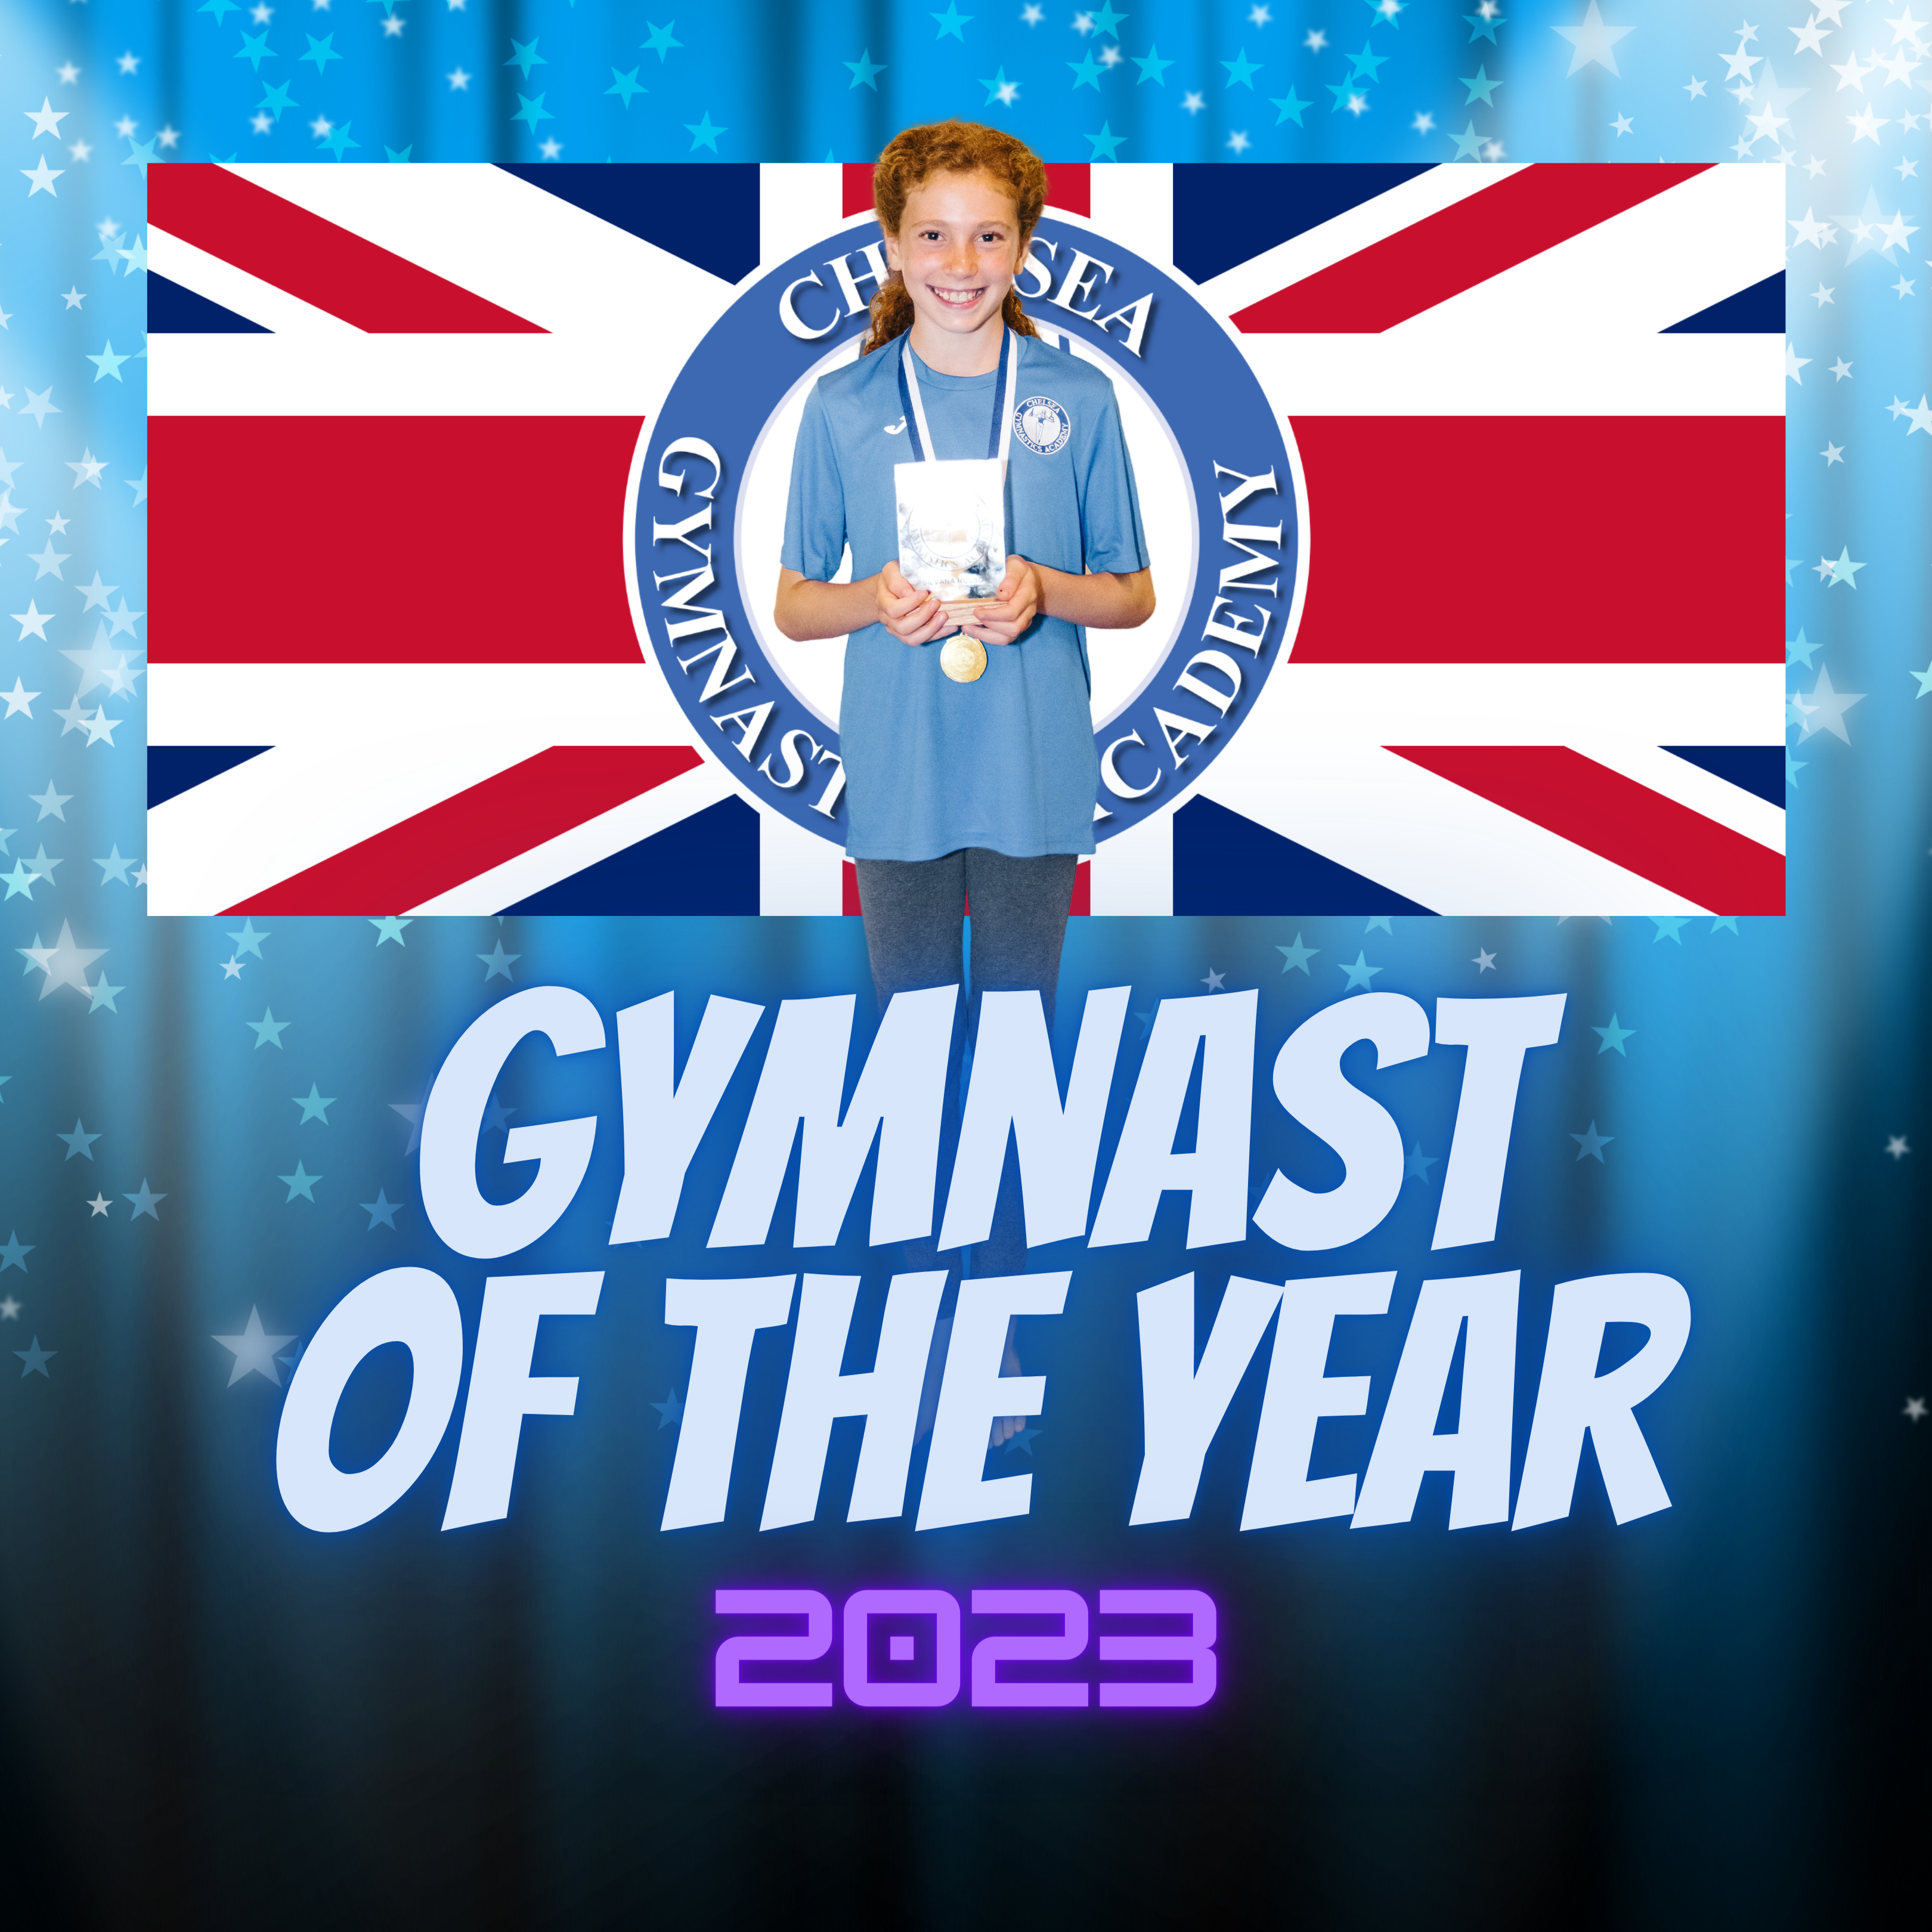 Gymnast of the Year at Chelsea Gymnastics in 2023